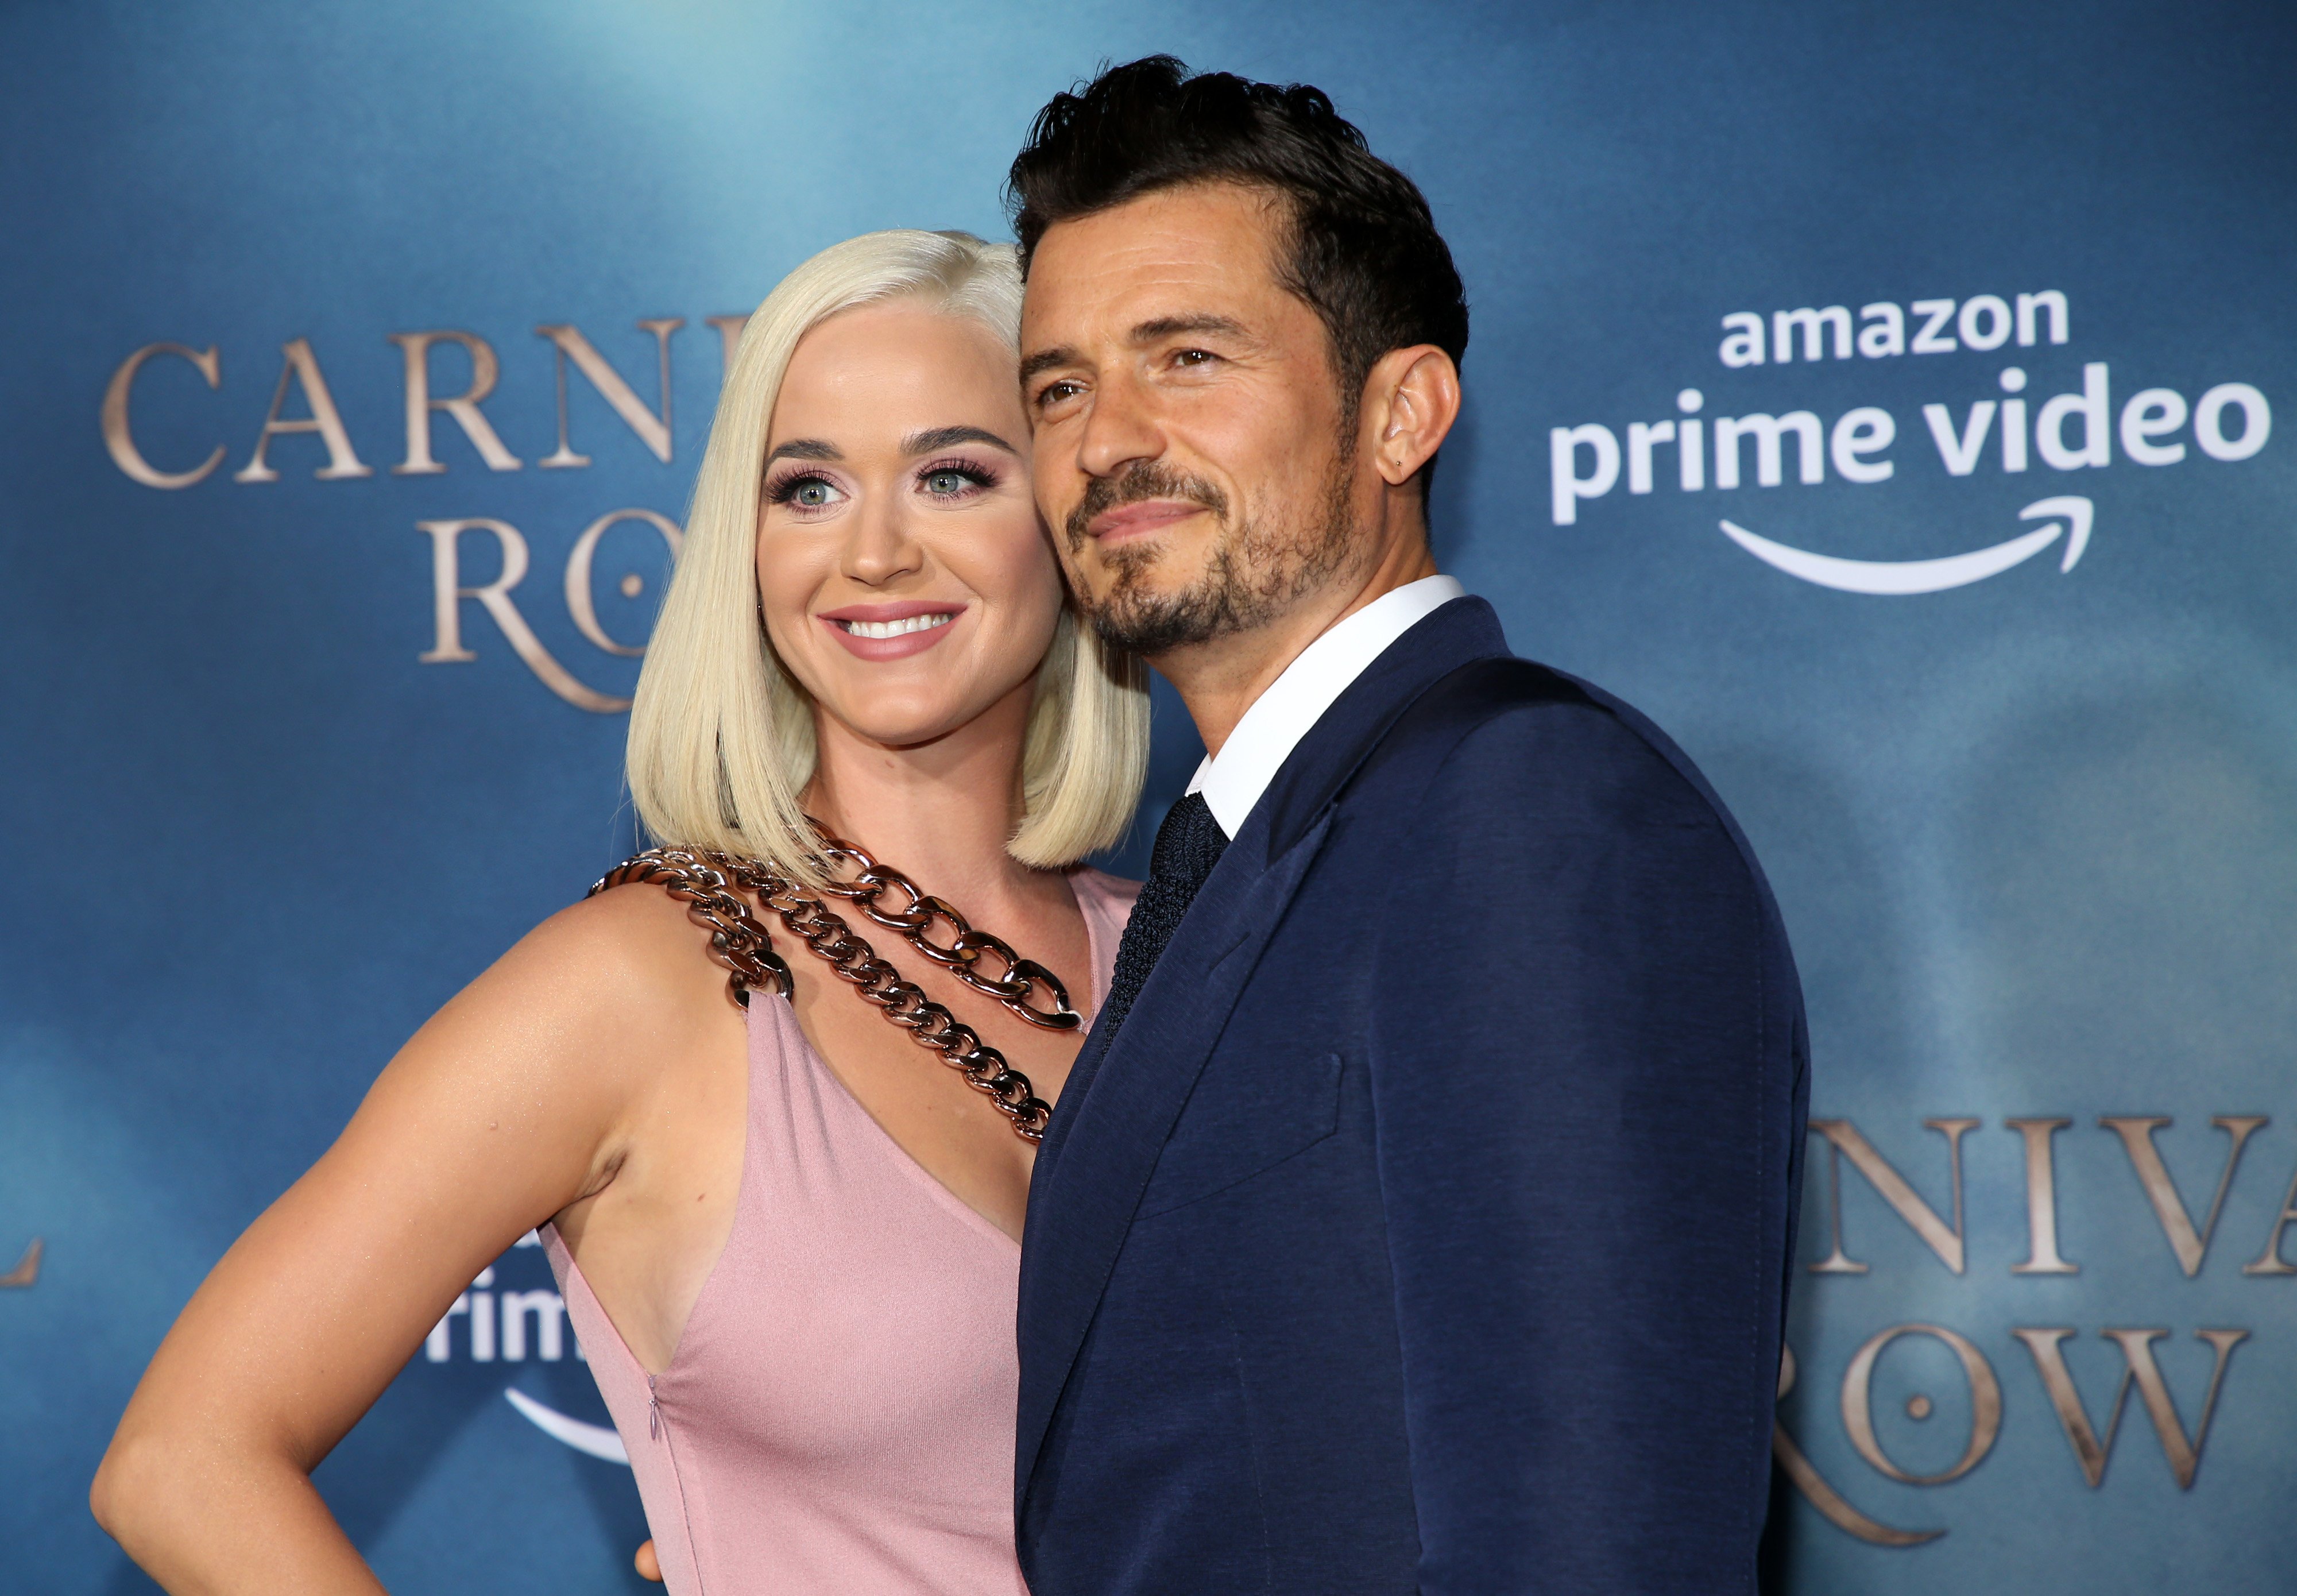 Katy Perry and Orlando Bloom attend the LA premiere of "Carnival Row" on August 21, 2019, in Hollywood, California. | Source: Getty Images.